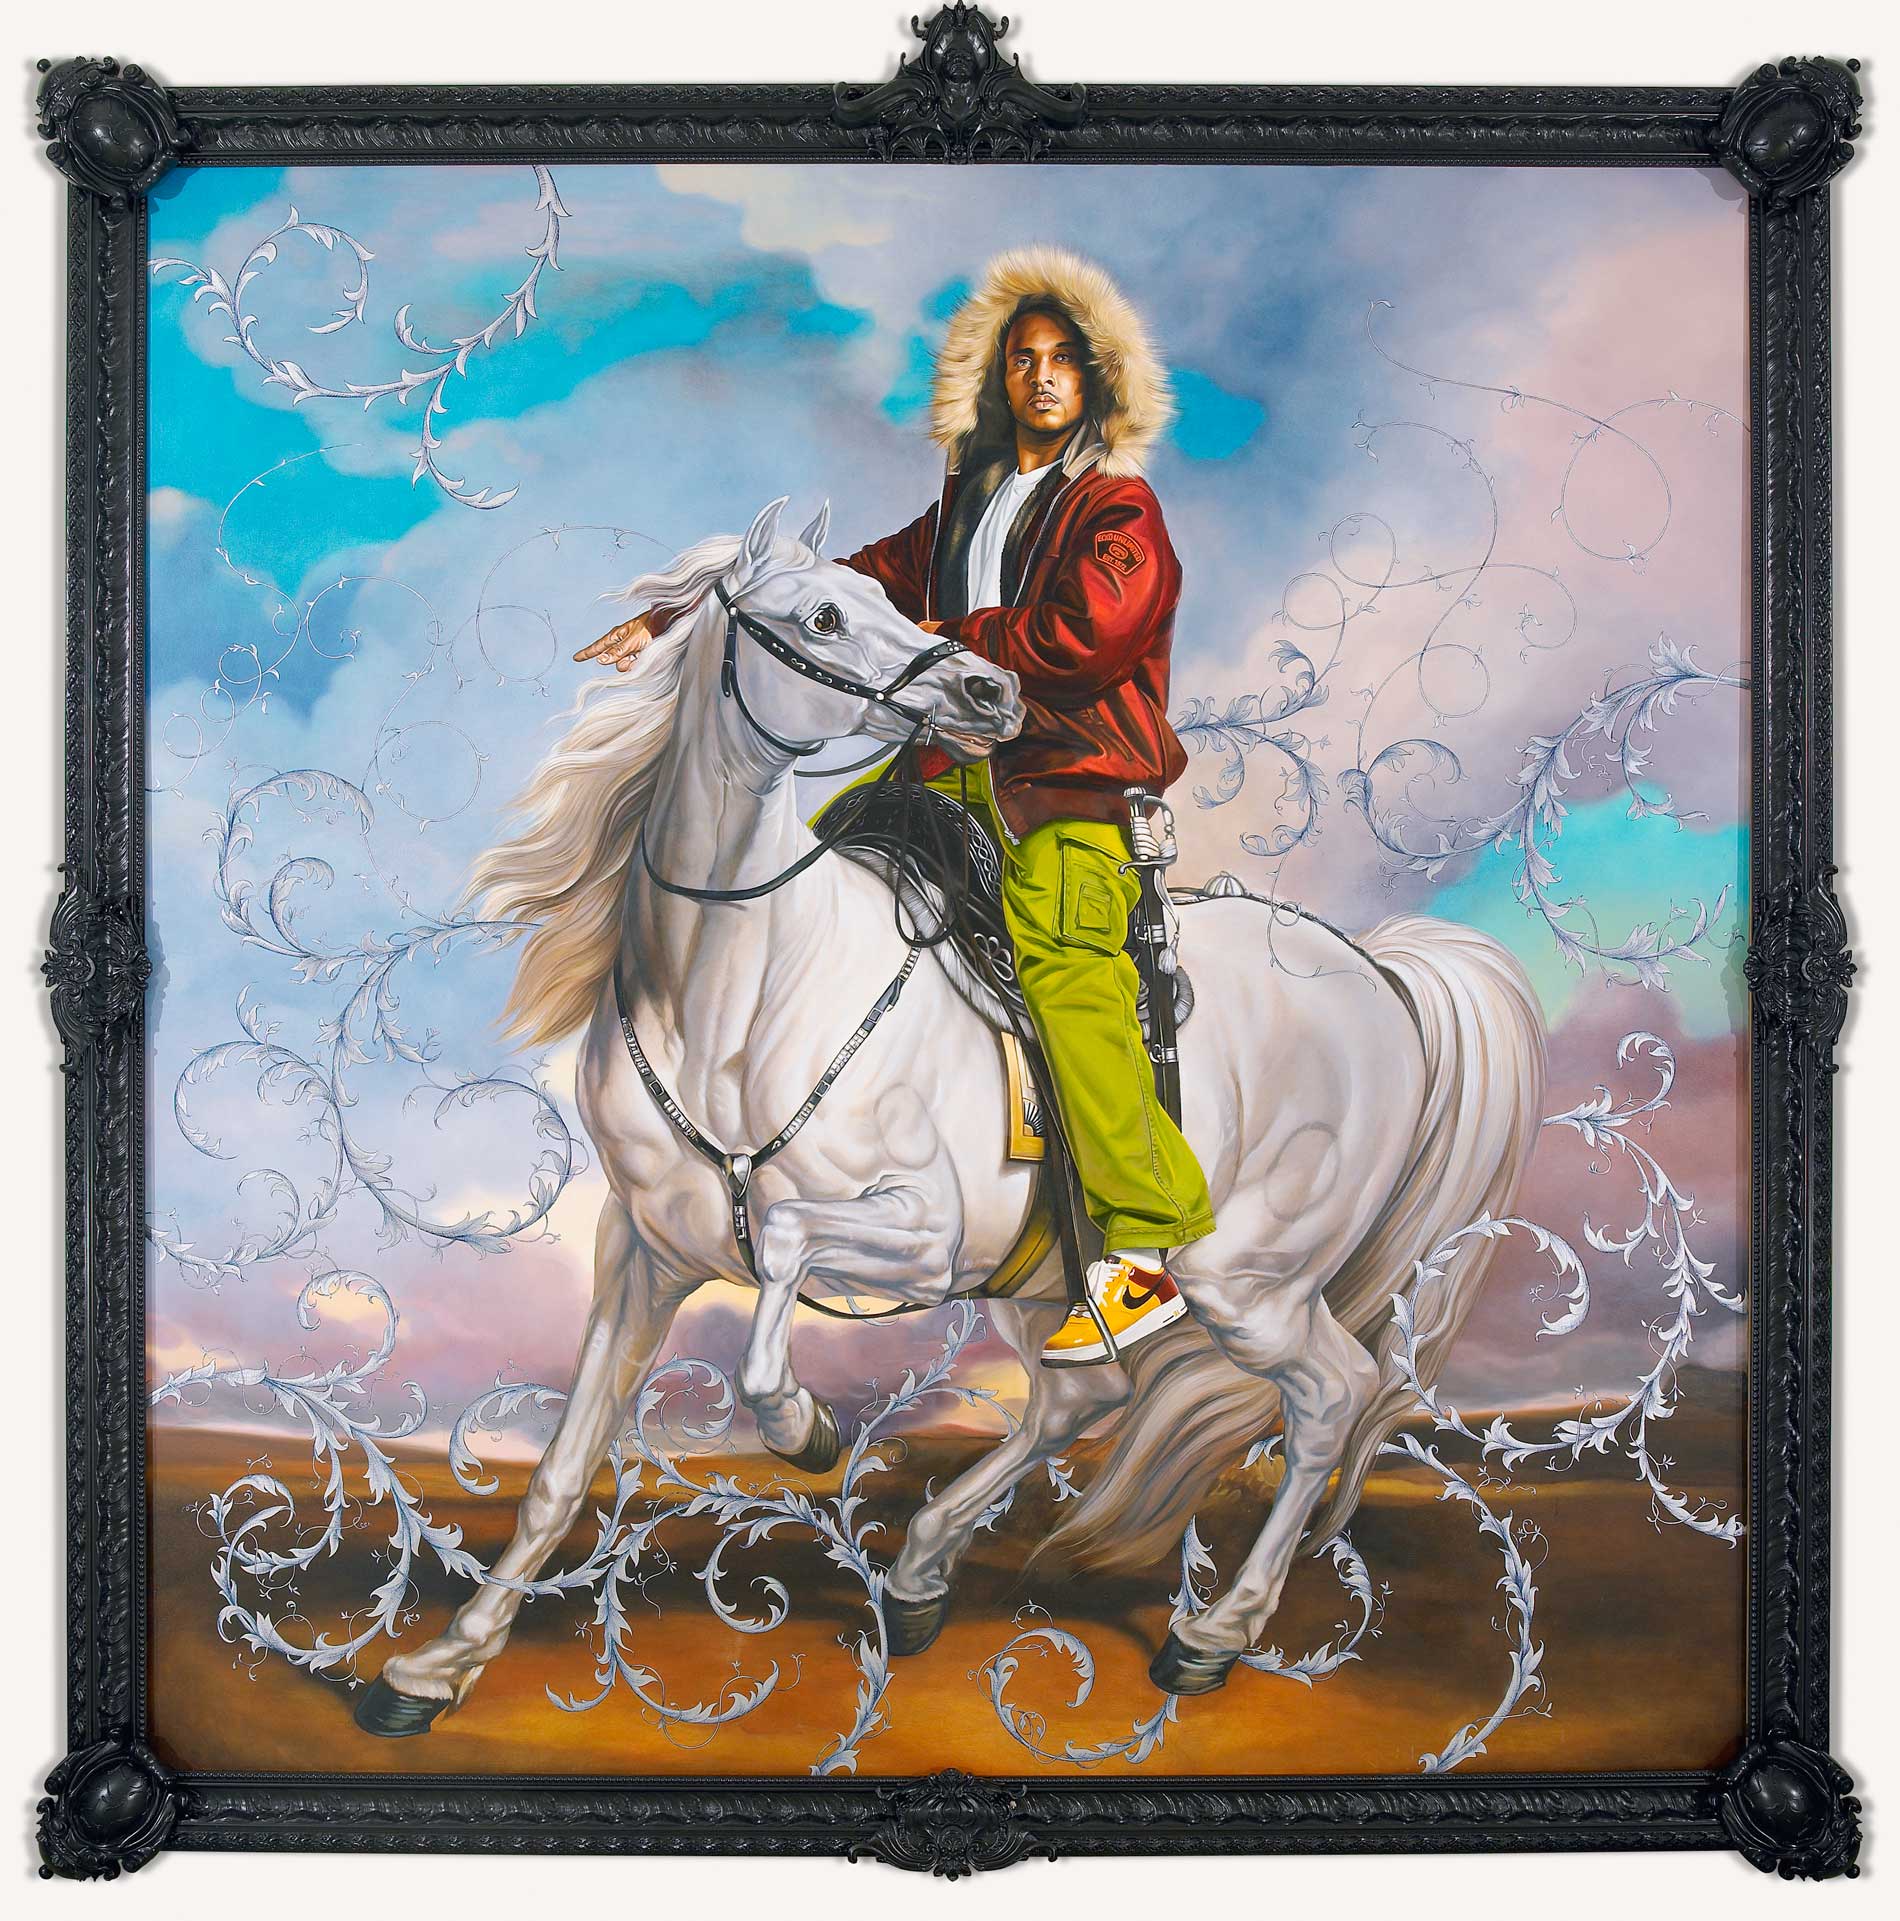 Kehinde Wiley | A New Republic, Brooklyn Museum, New York City, USA,  February 20- May 24, 2015 | Colonel Platoff on his Charger, 2008 Oil and Enamel on Canvas. | 11